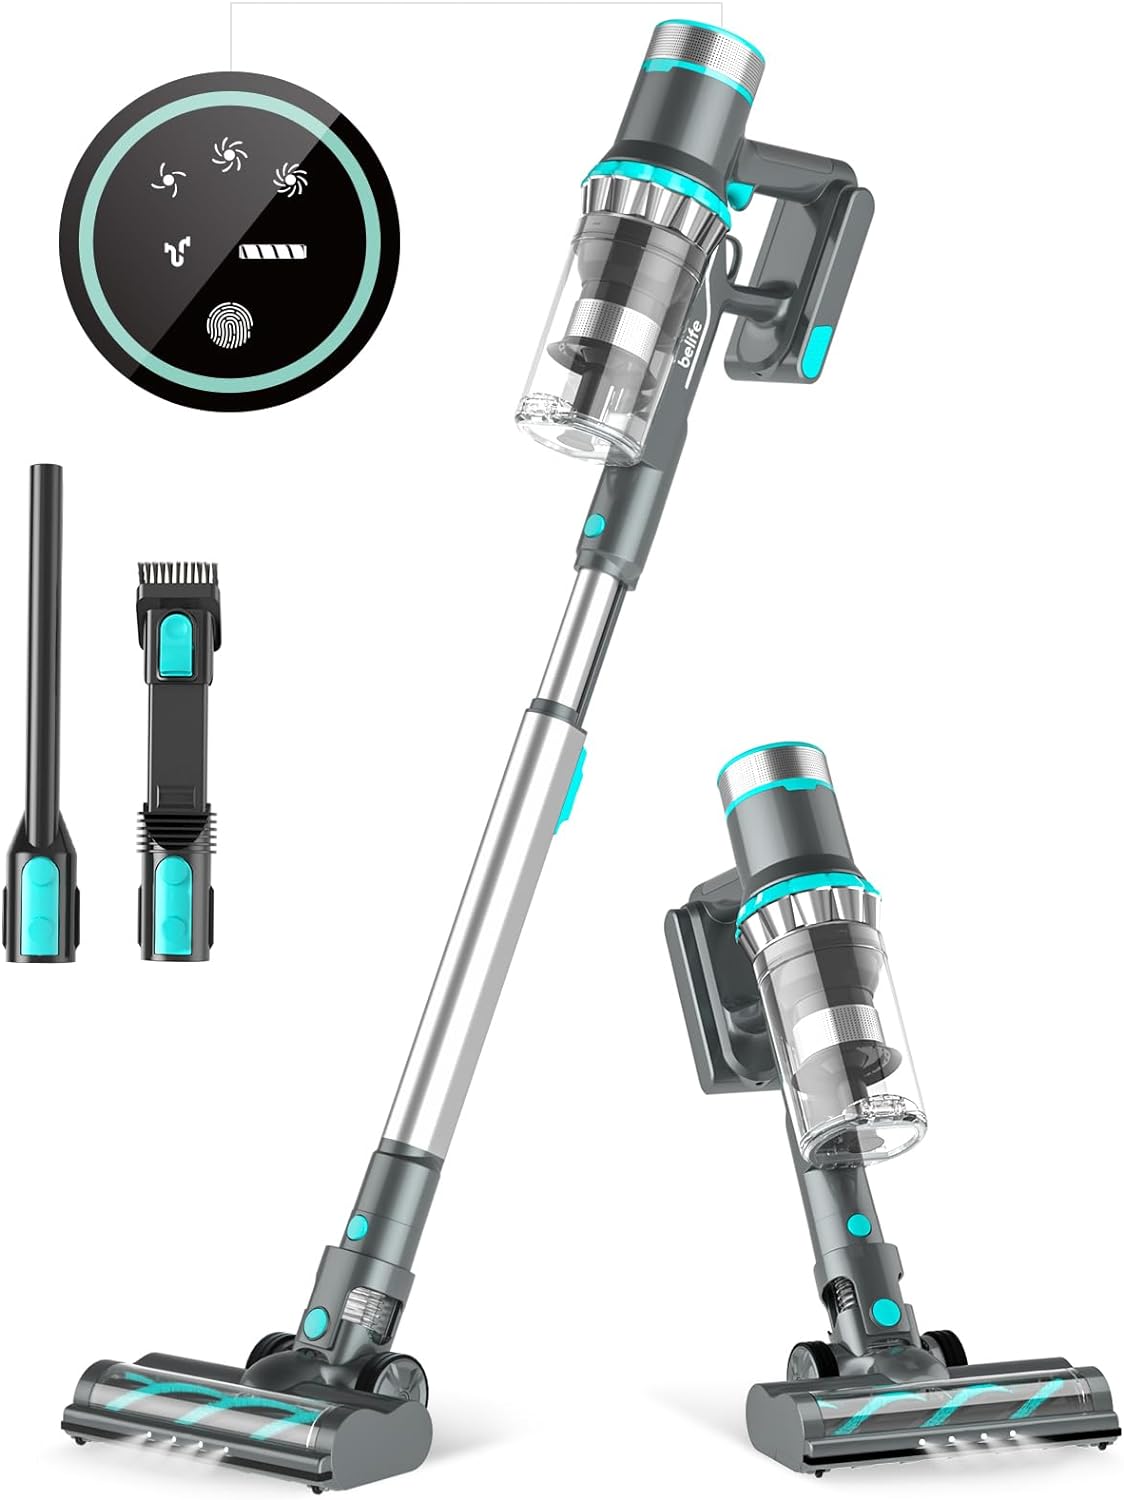 Belife BVC11 Cordless Vacuum Review: Powerful and Lightweight Cleaning Tool